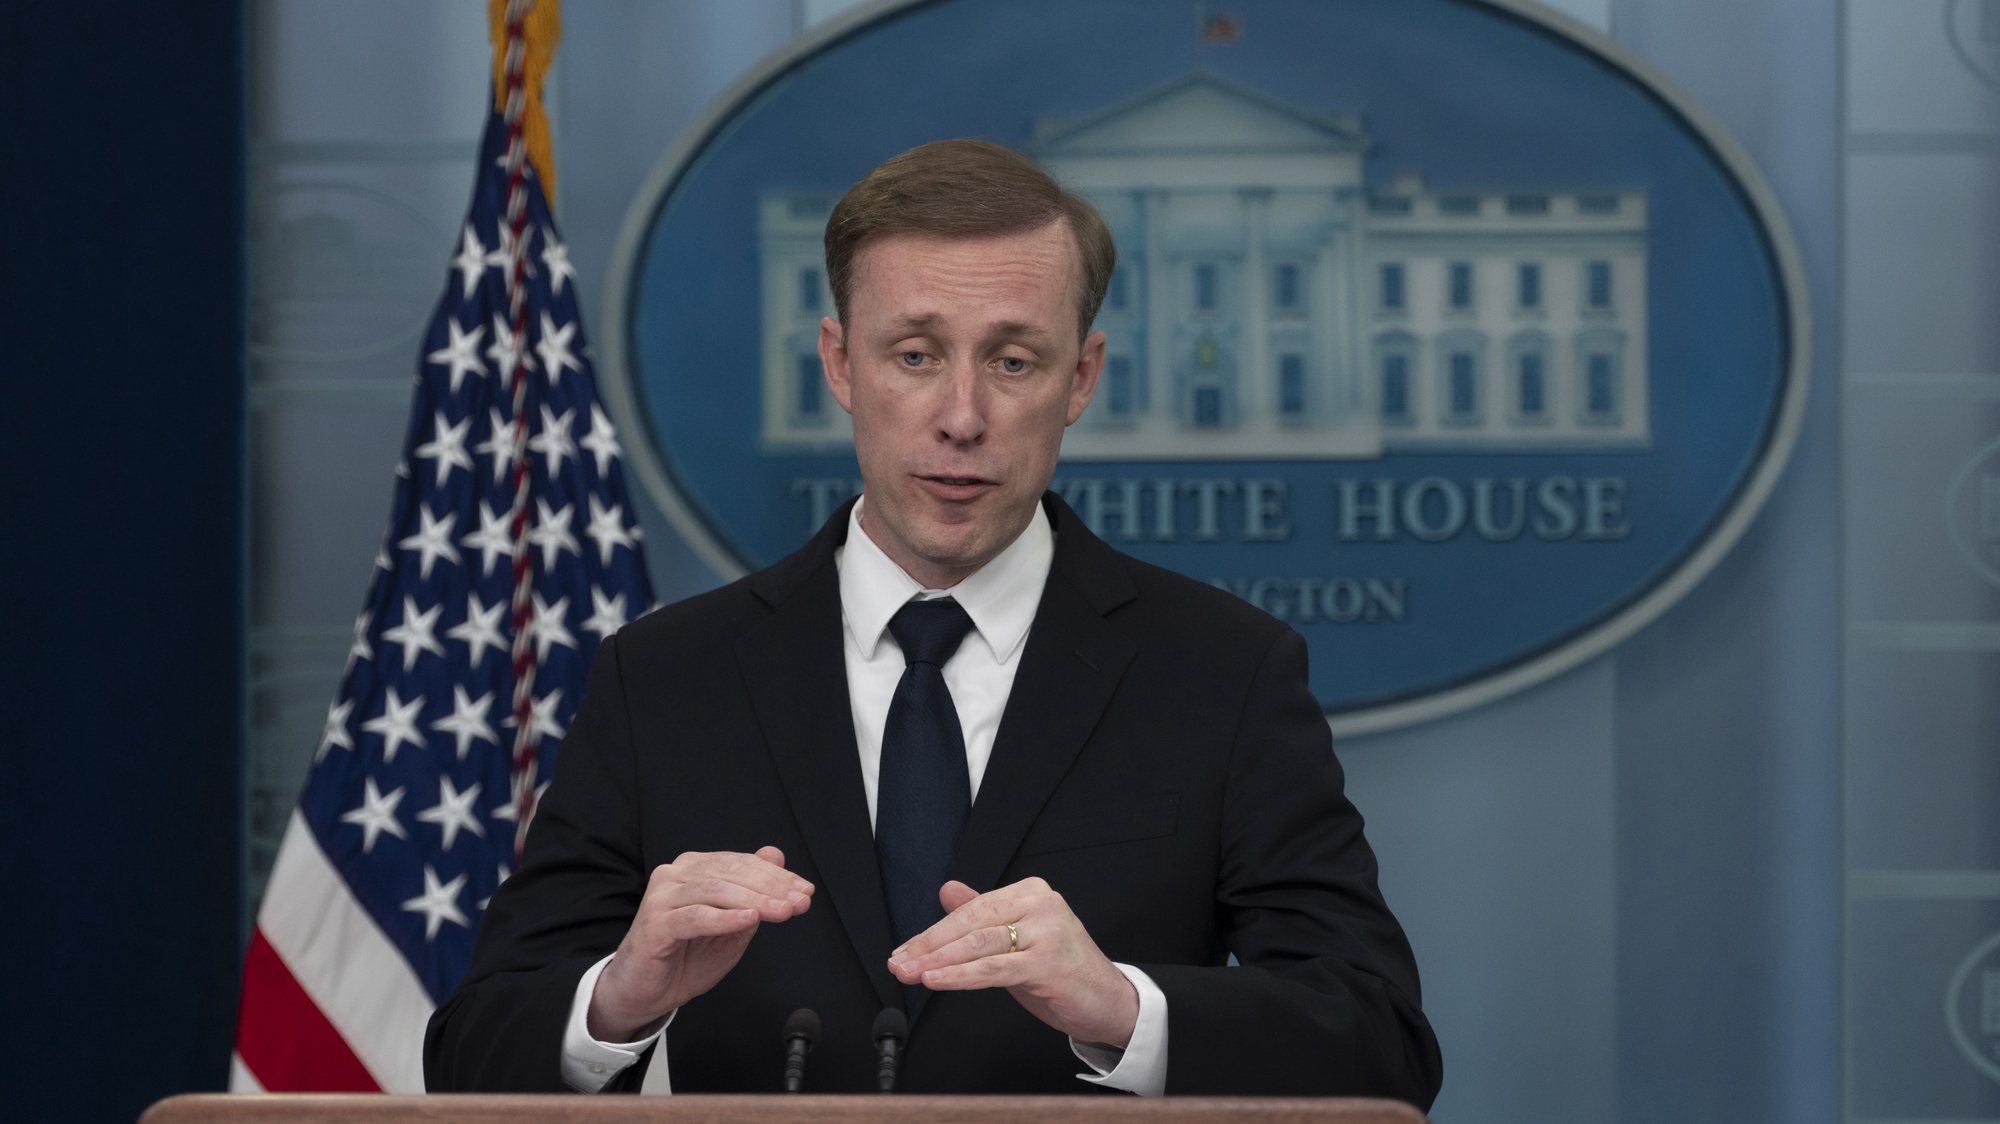 epa10589607 National Security Advisor Jake Sullivan participates in a news briefing at the White House in Washington, DC, USA, 24 April 2023.  








































United States President Joe Biden and first lady Dr. Jill Biden welcome Governors and their spouses for dinner at the White House during the winter meeting of the National Governors Association in Washington, DC on February 11, 2023.  
Credit: Chris Kleponis / Pool via CNP




















































































United States President Joe Biden and first lady Dr. Jill Biden welcome Governors and their spouses for dinner at the White House during the winter meeting of the National Governors Association in Washington, DC on February 11, 2023.  
Credit: Chris Kleponis / Pool via CNP




















































































United States President Joe Biden and first lady Dr. Jill Biden welcome Governors and their spouses for dinner at the White House during the winter meeting of the National Governors Association in Washington, DC on February 11, 2023.  
Credit: Chris Kleponis / Pool via CNP




















































































United States President Joe Biden and first lady Dr. Jill Biden welcome Governors and their spouses for dinner at the White House during the winter meeting of the National Governors Association in Washington, DC on February 11, 2023.  
Credit: Chris Kleponis / Pool via CNP











































United States President Joe Biden meets with Tennessee State Representatives Justin Jones, Justin Pearson, and Gloria Johnson at the White House in Washington, DC, April 24, 2023.  
Chris Kleponis - Pool via CNP









































United States President Joe Biden and first lady Dr. Jill Biden welcome Governors and their spouses for dinner at the White House during the winter meeting of the National